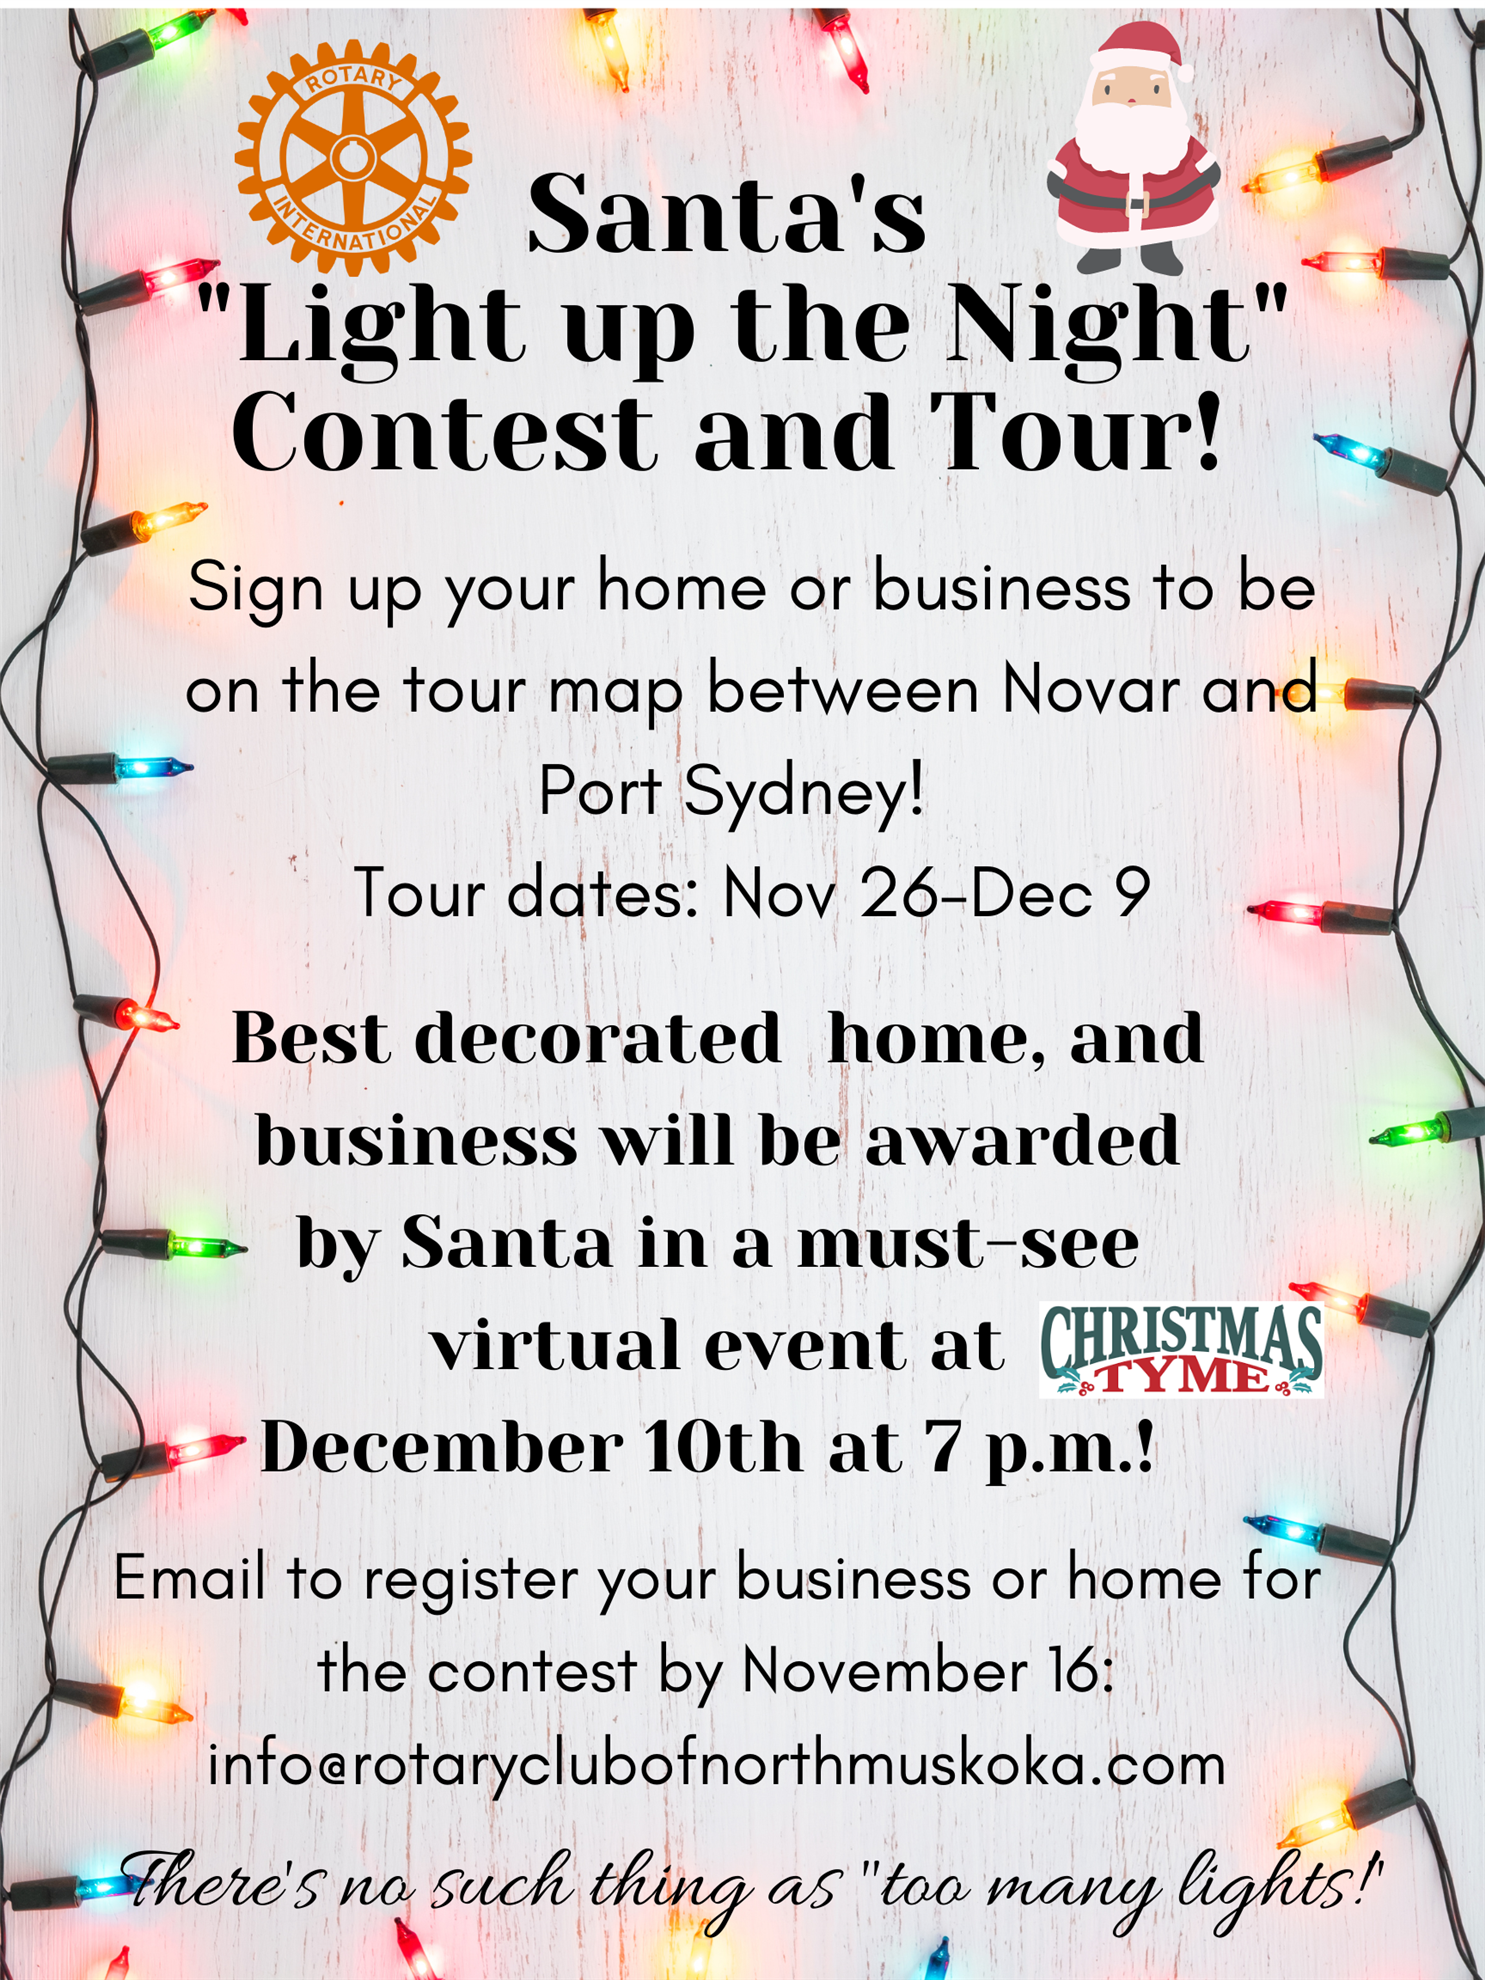 A poster for Santa's Light Up the Night 2021